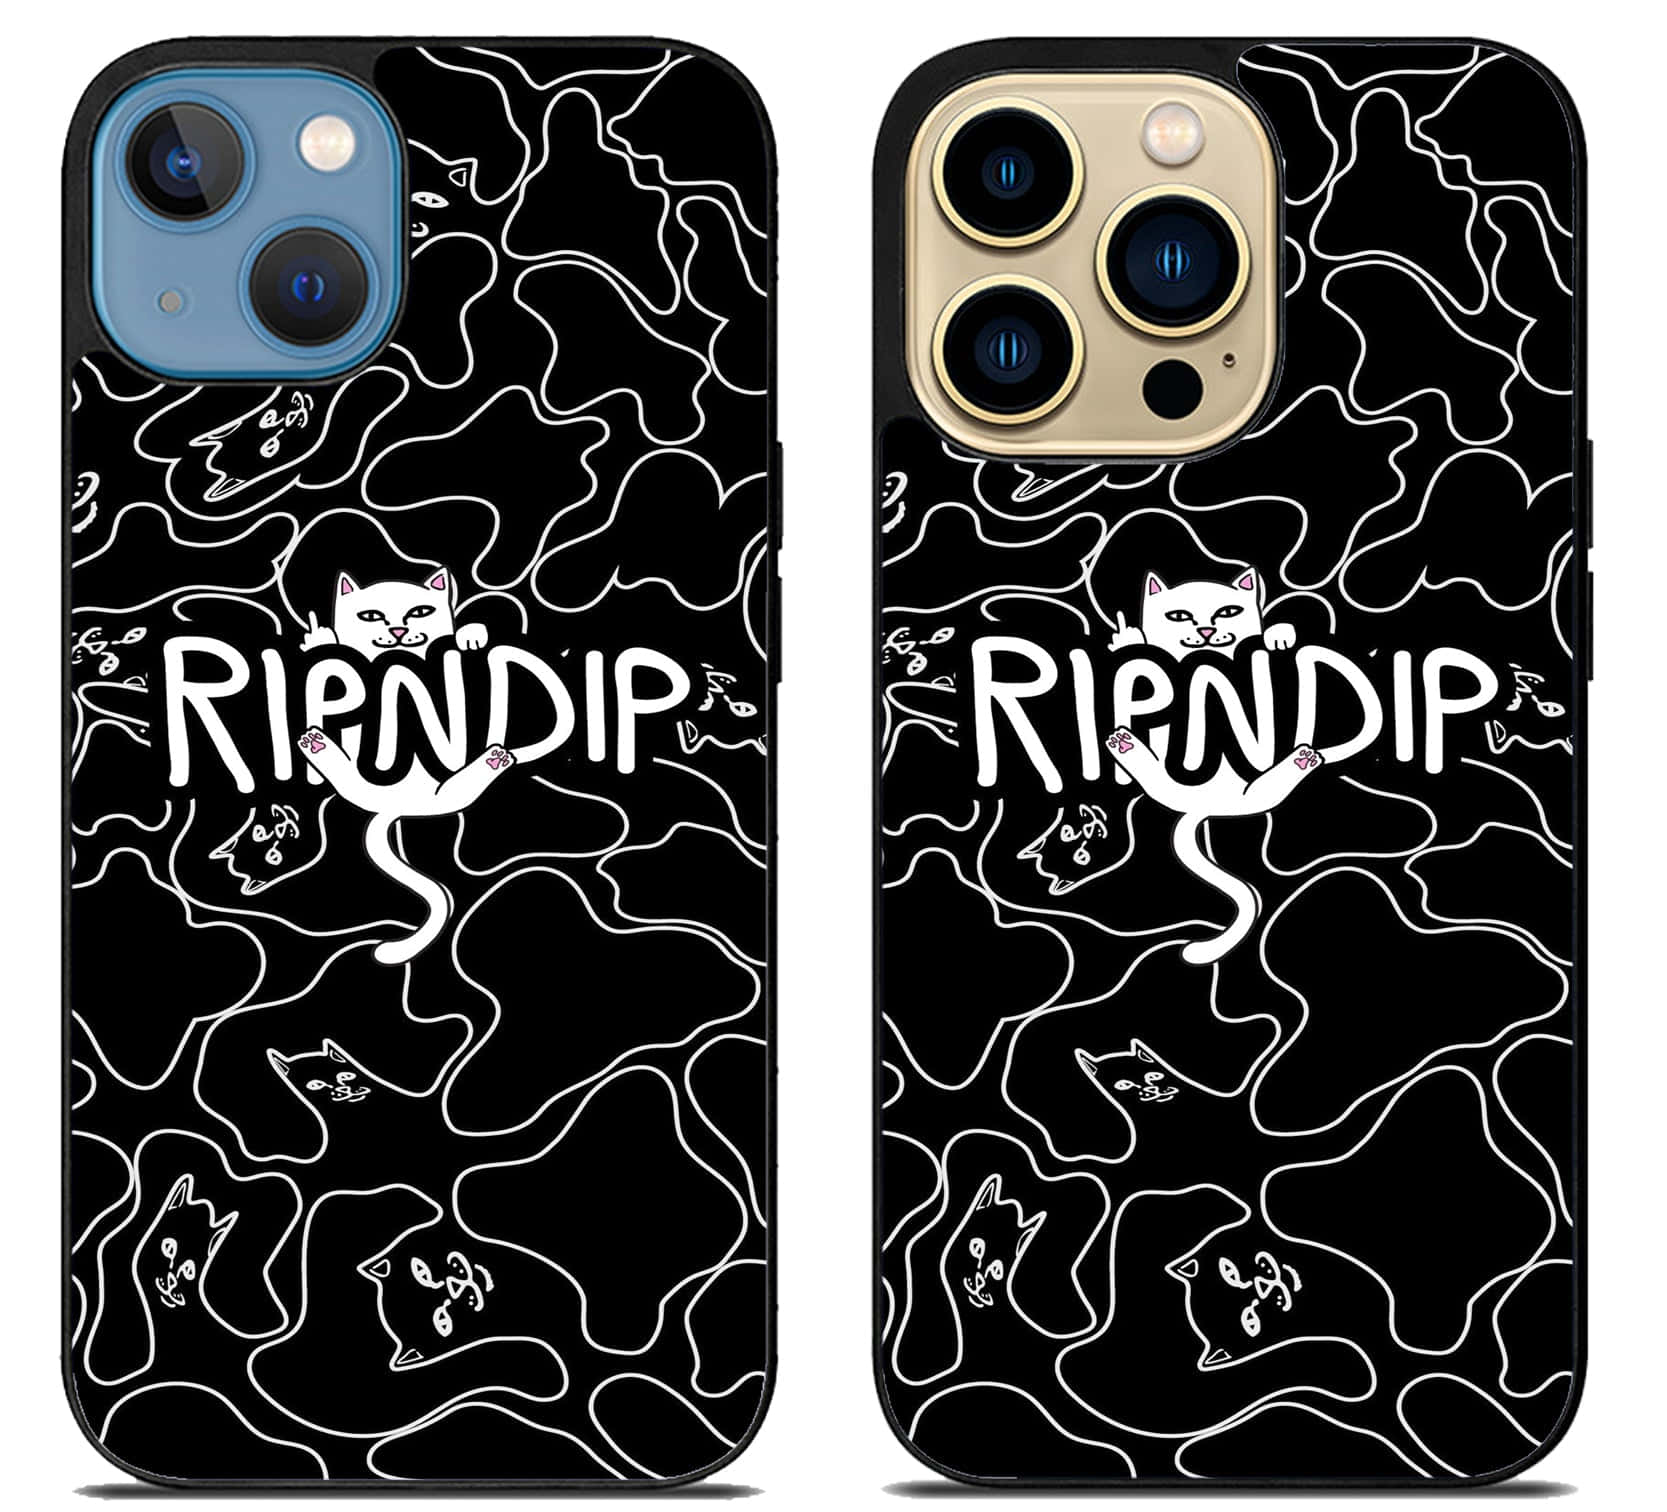 Standing Out From The Crowd With Ripndip